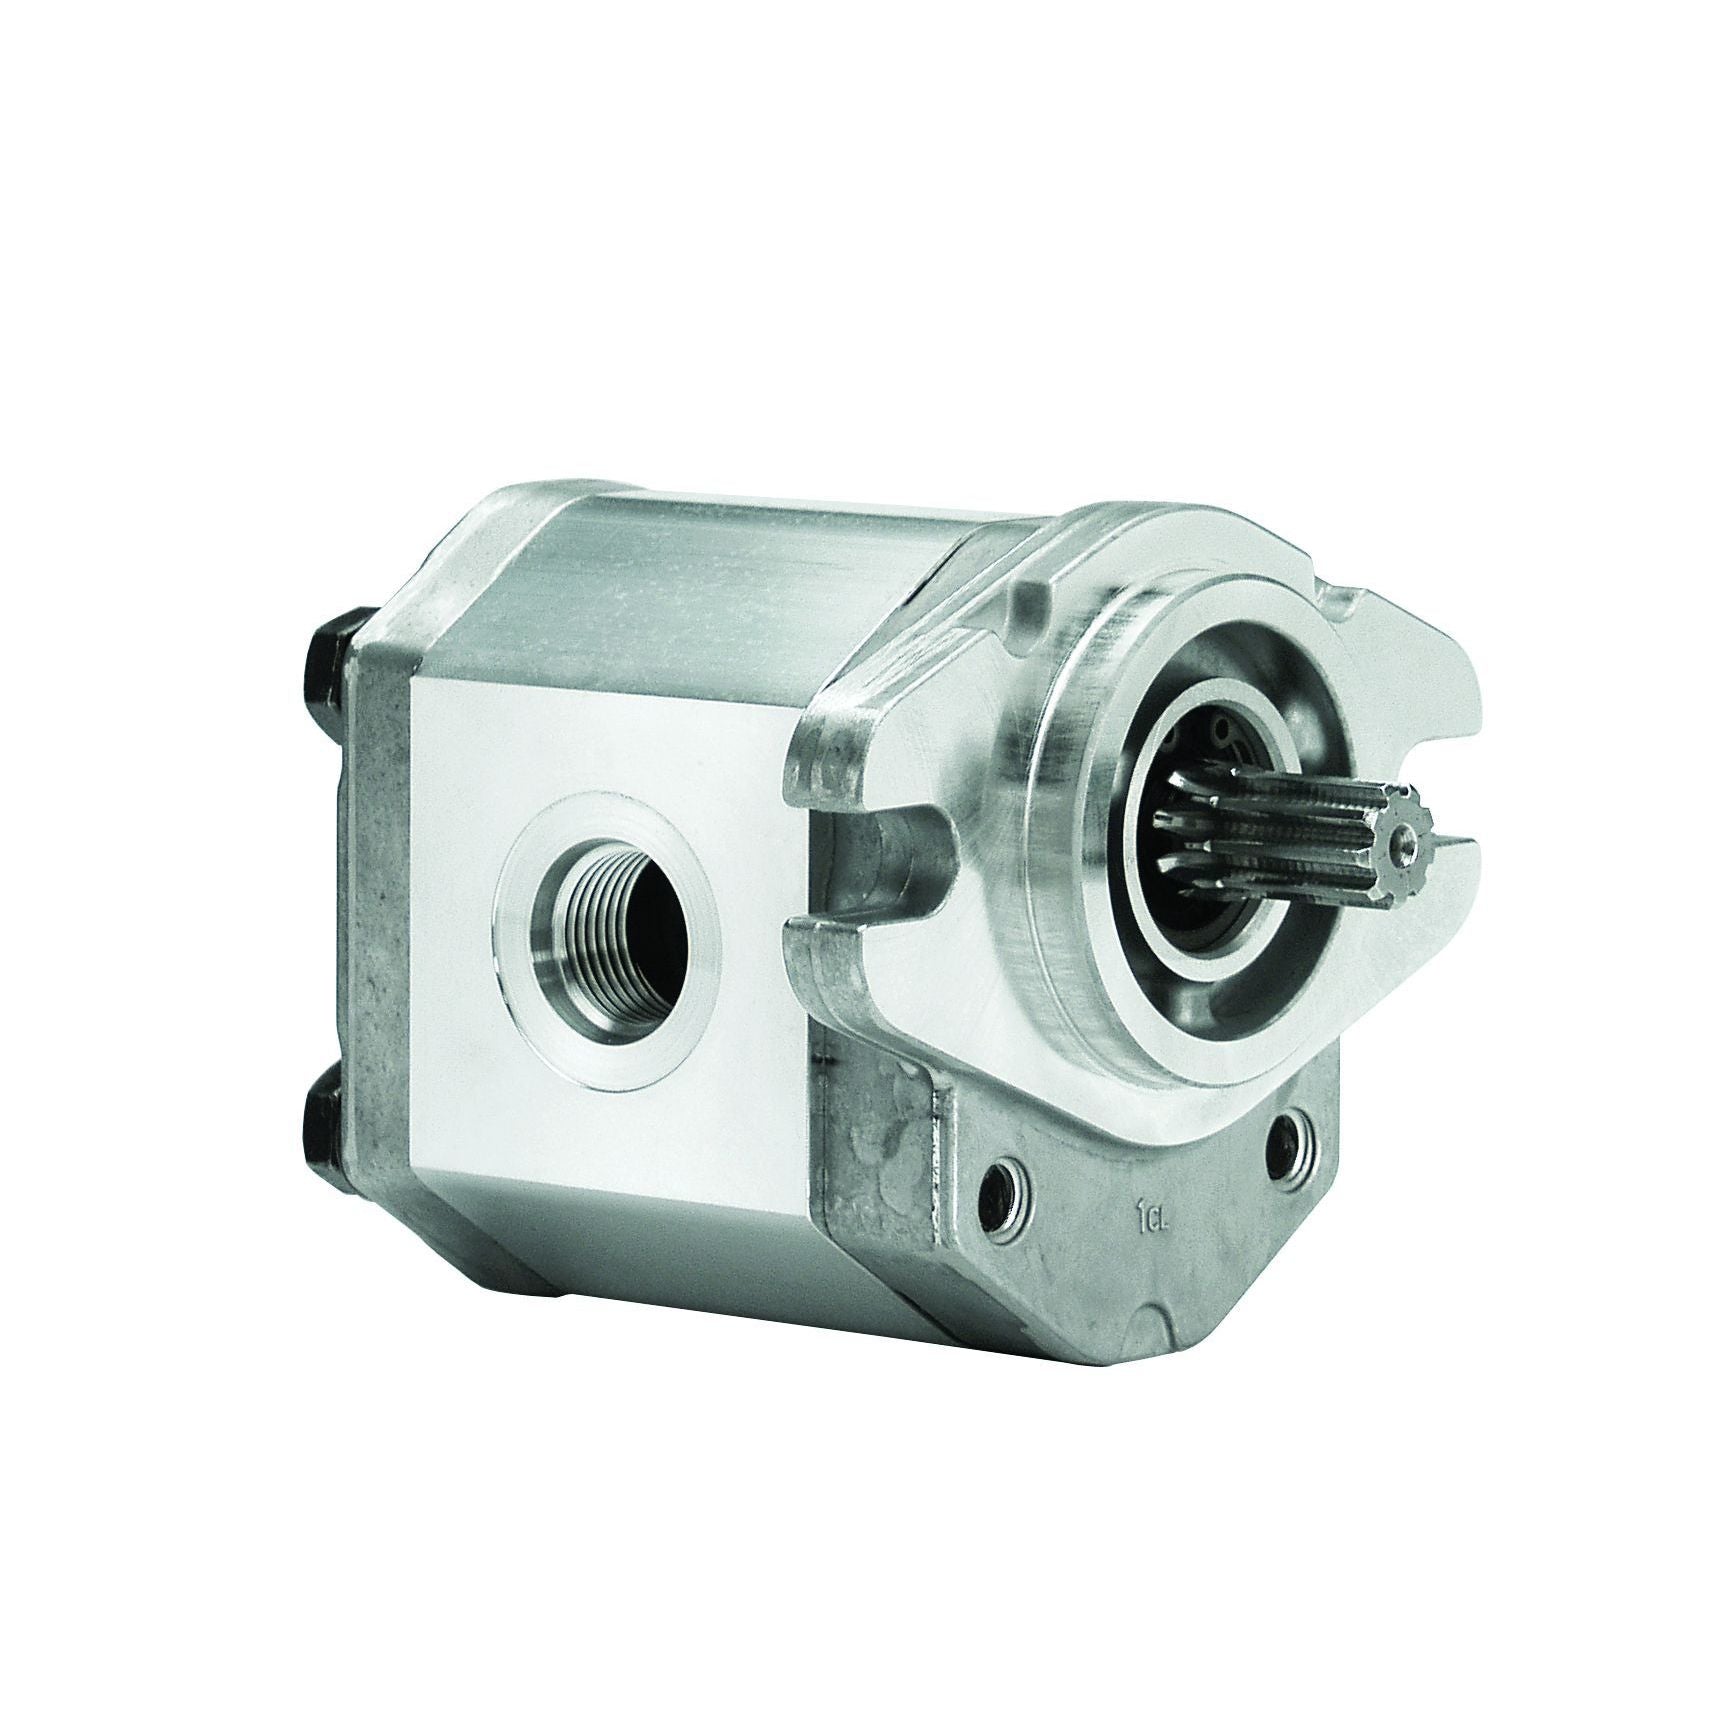 ALP2A-D-34-S1 : Marzocchi Gear Pump, CW, 23.7cc (1.4457in3), 11.27 GPM, 2610psi, 2000 RPM, #12 SAE (3/4") In, #10 SAE (5/8") Out, Splined Shaft 9T 16/32DP, SAE A 2-Bolt Mount